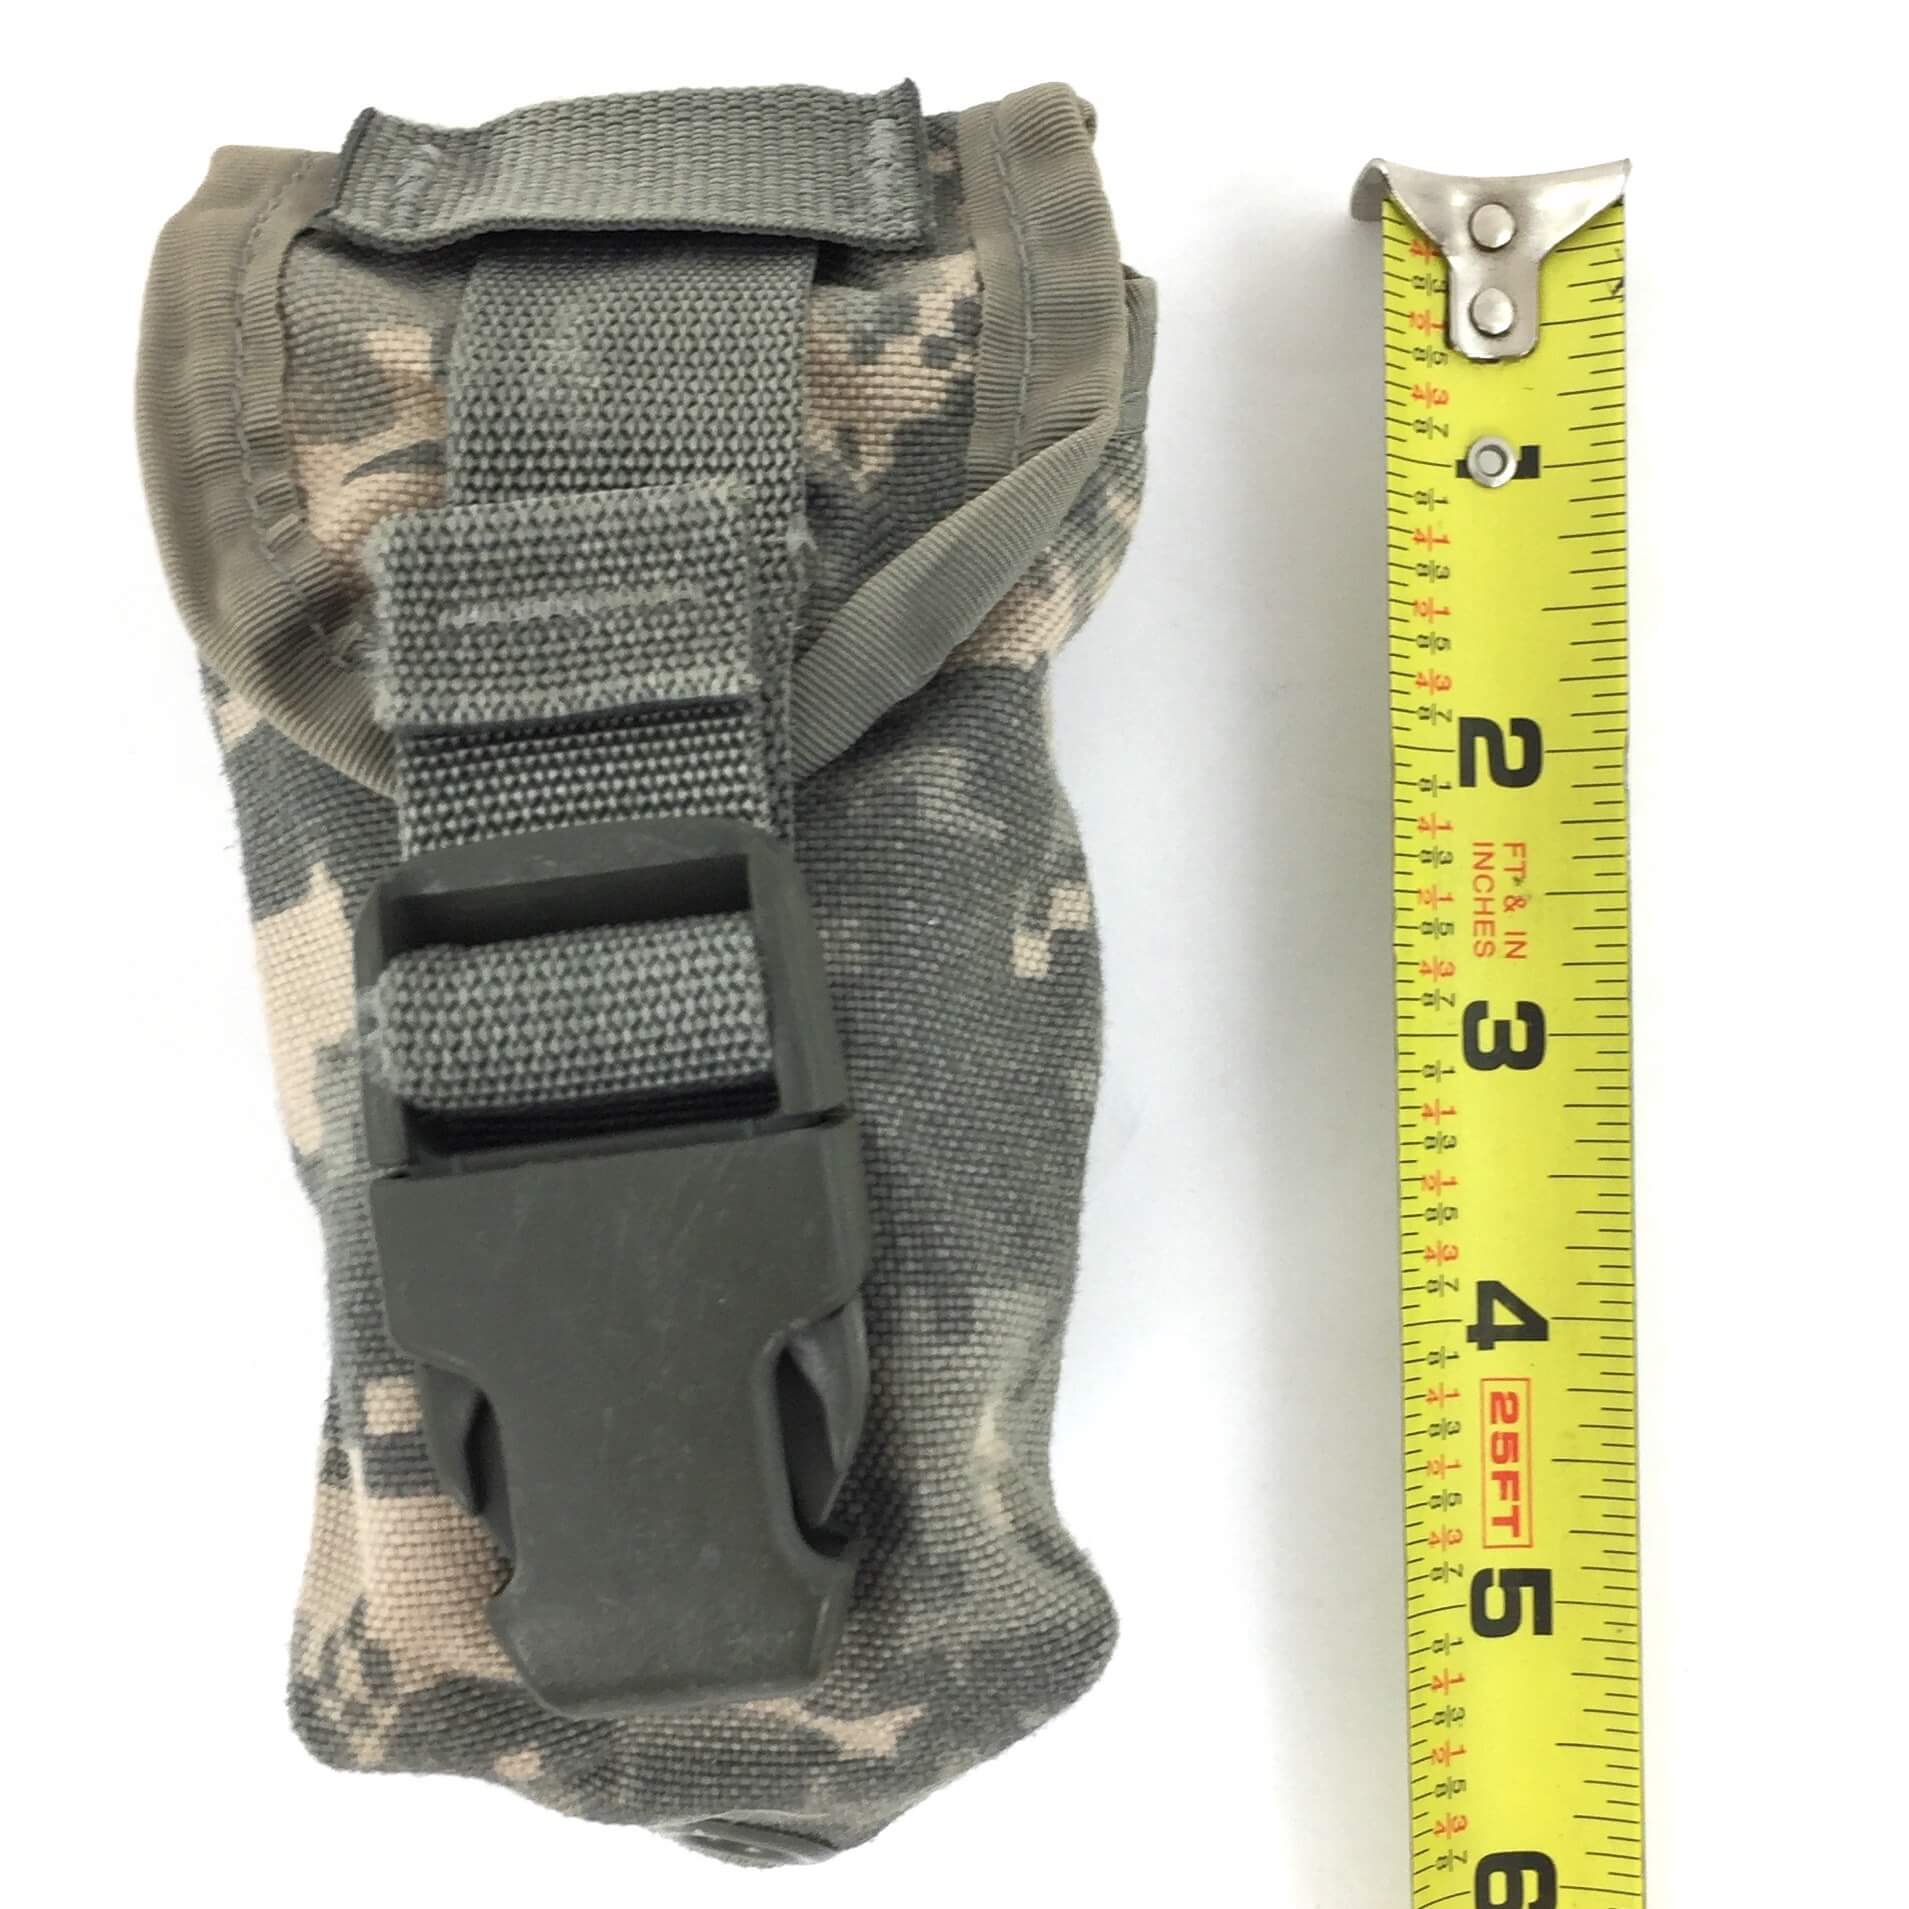 Lot of 3 US Military Army ACU MOLLE Flashbang Flash Bang Grenade Ammo Pouch LN 